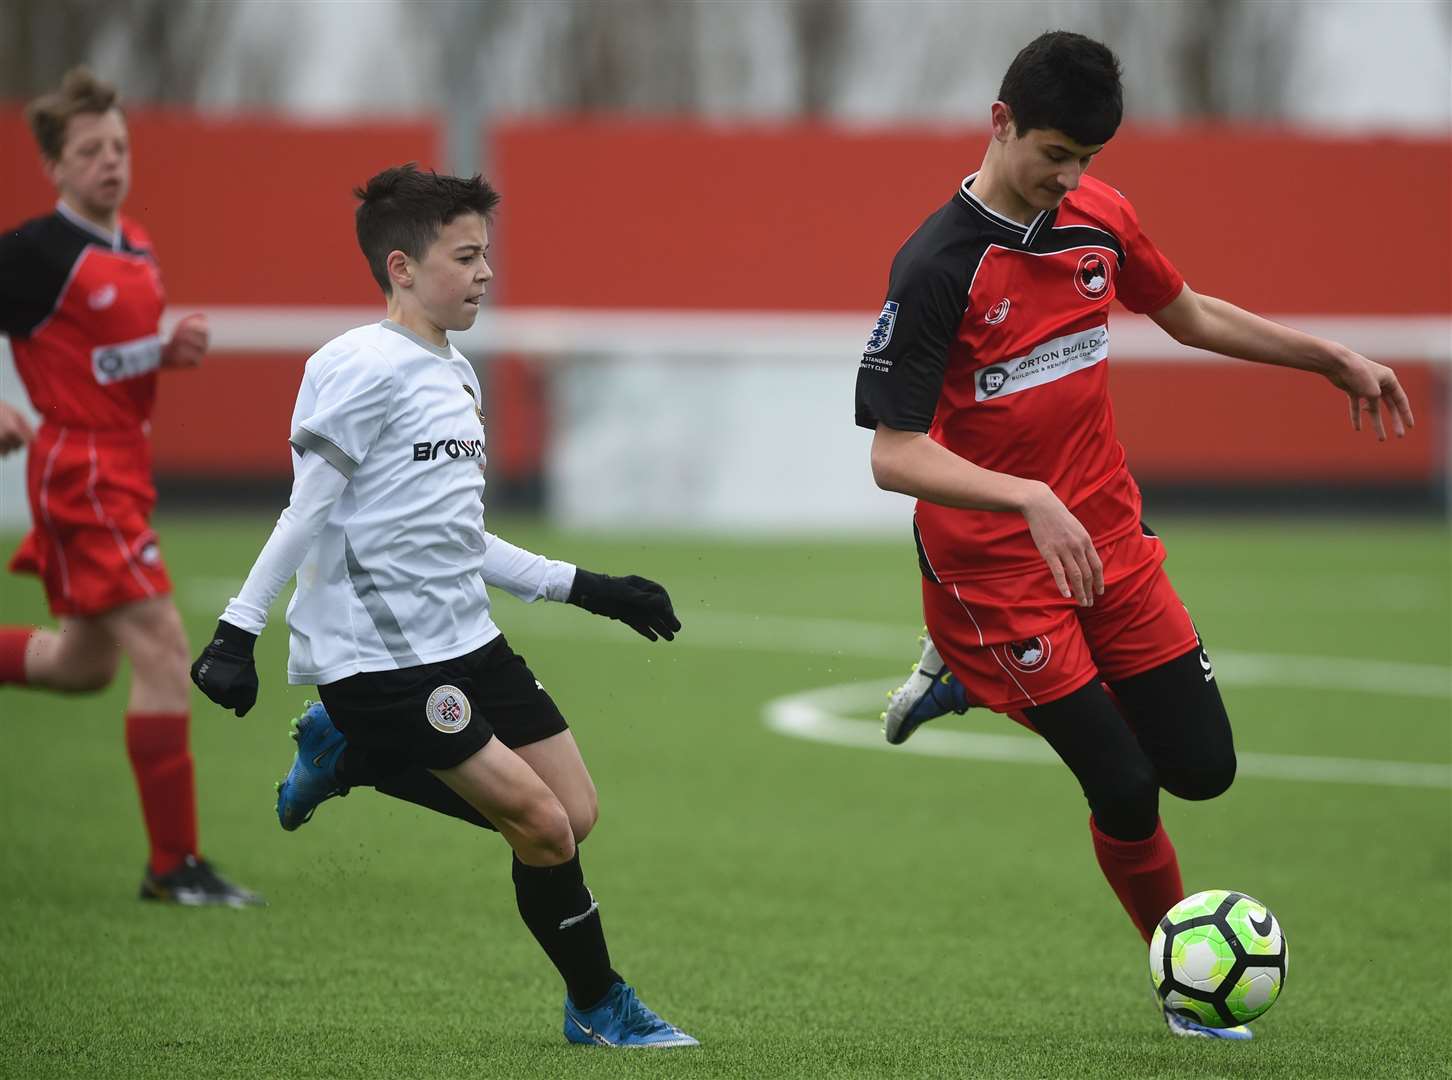 Phoenix Sports (red) under-13s bring the ball out of defence. Picture: PSP Images